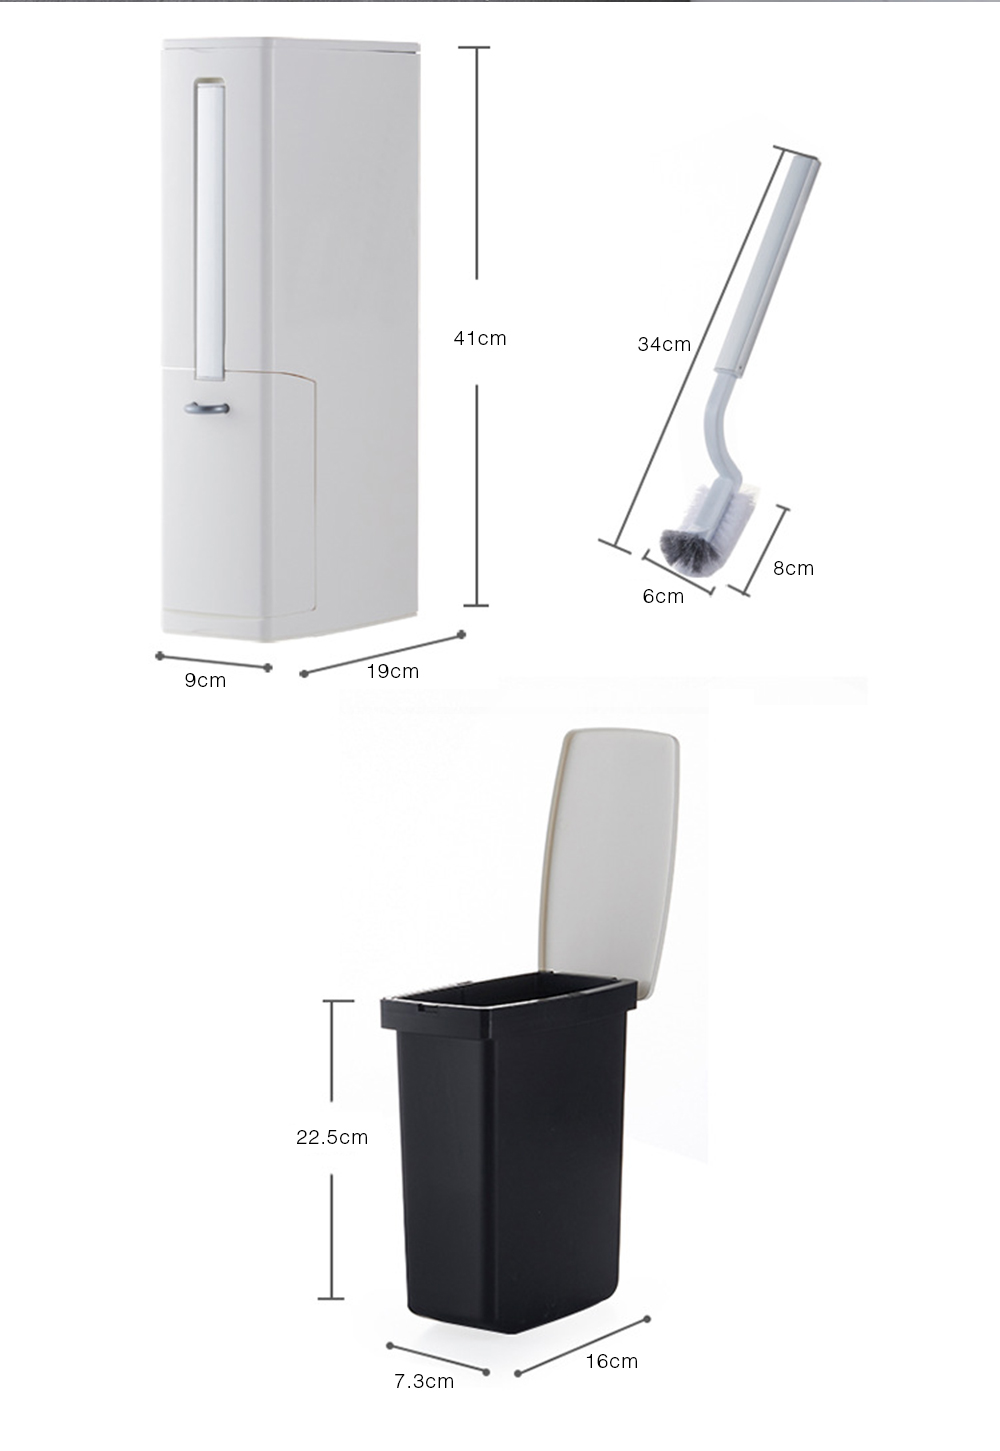 Multifunction Narrow Type Plastic Trash Can with Toilet Brush